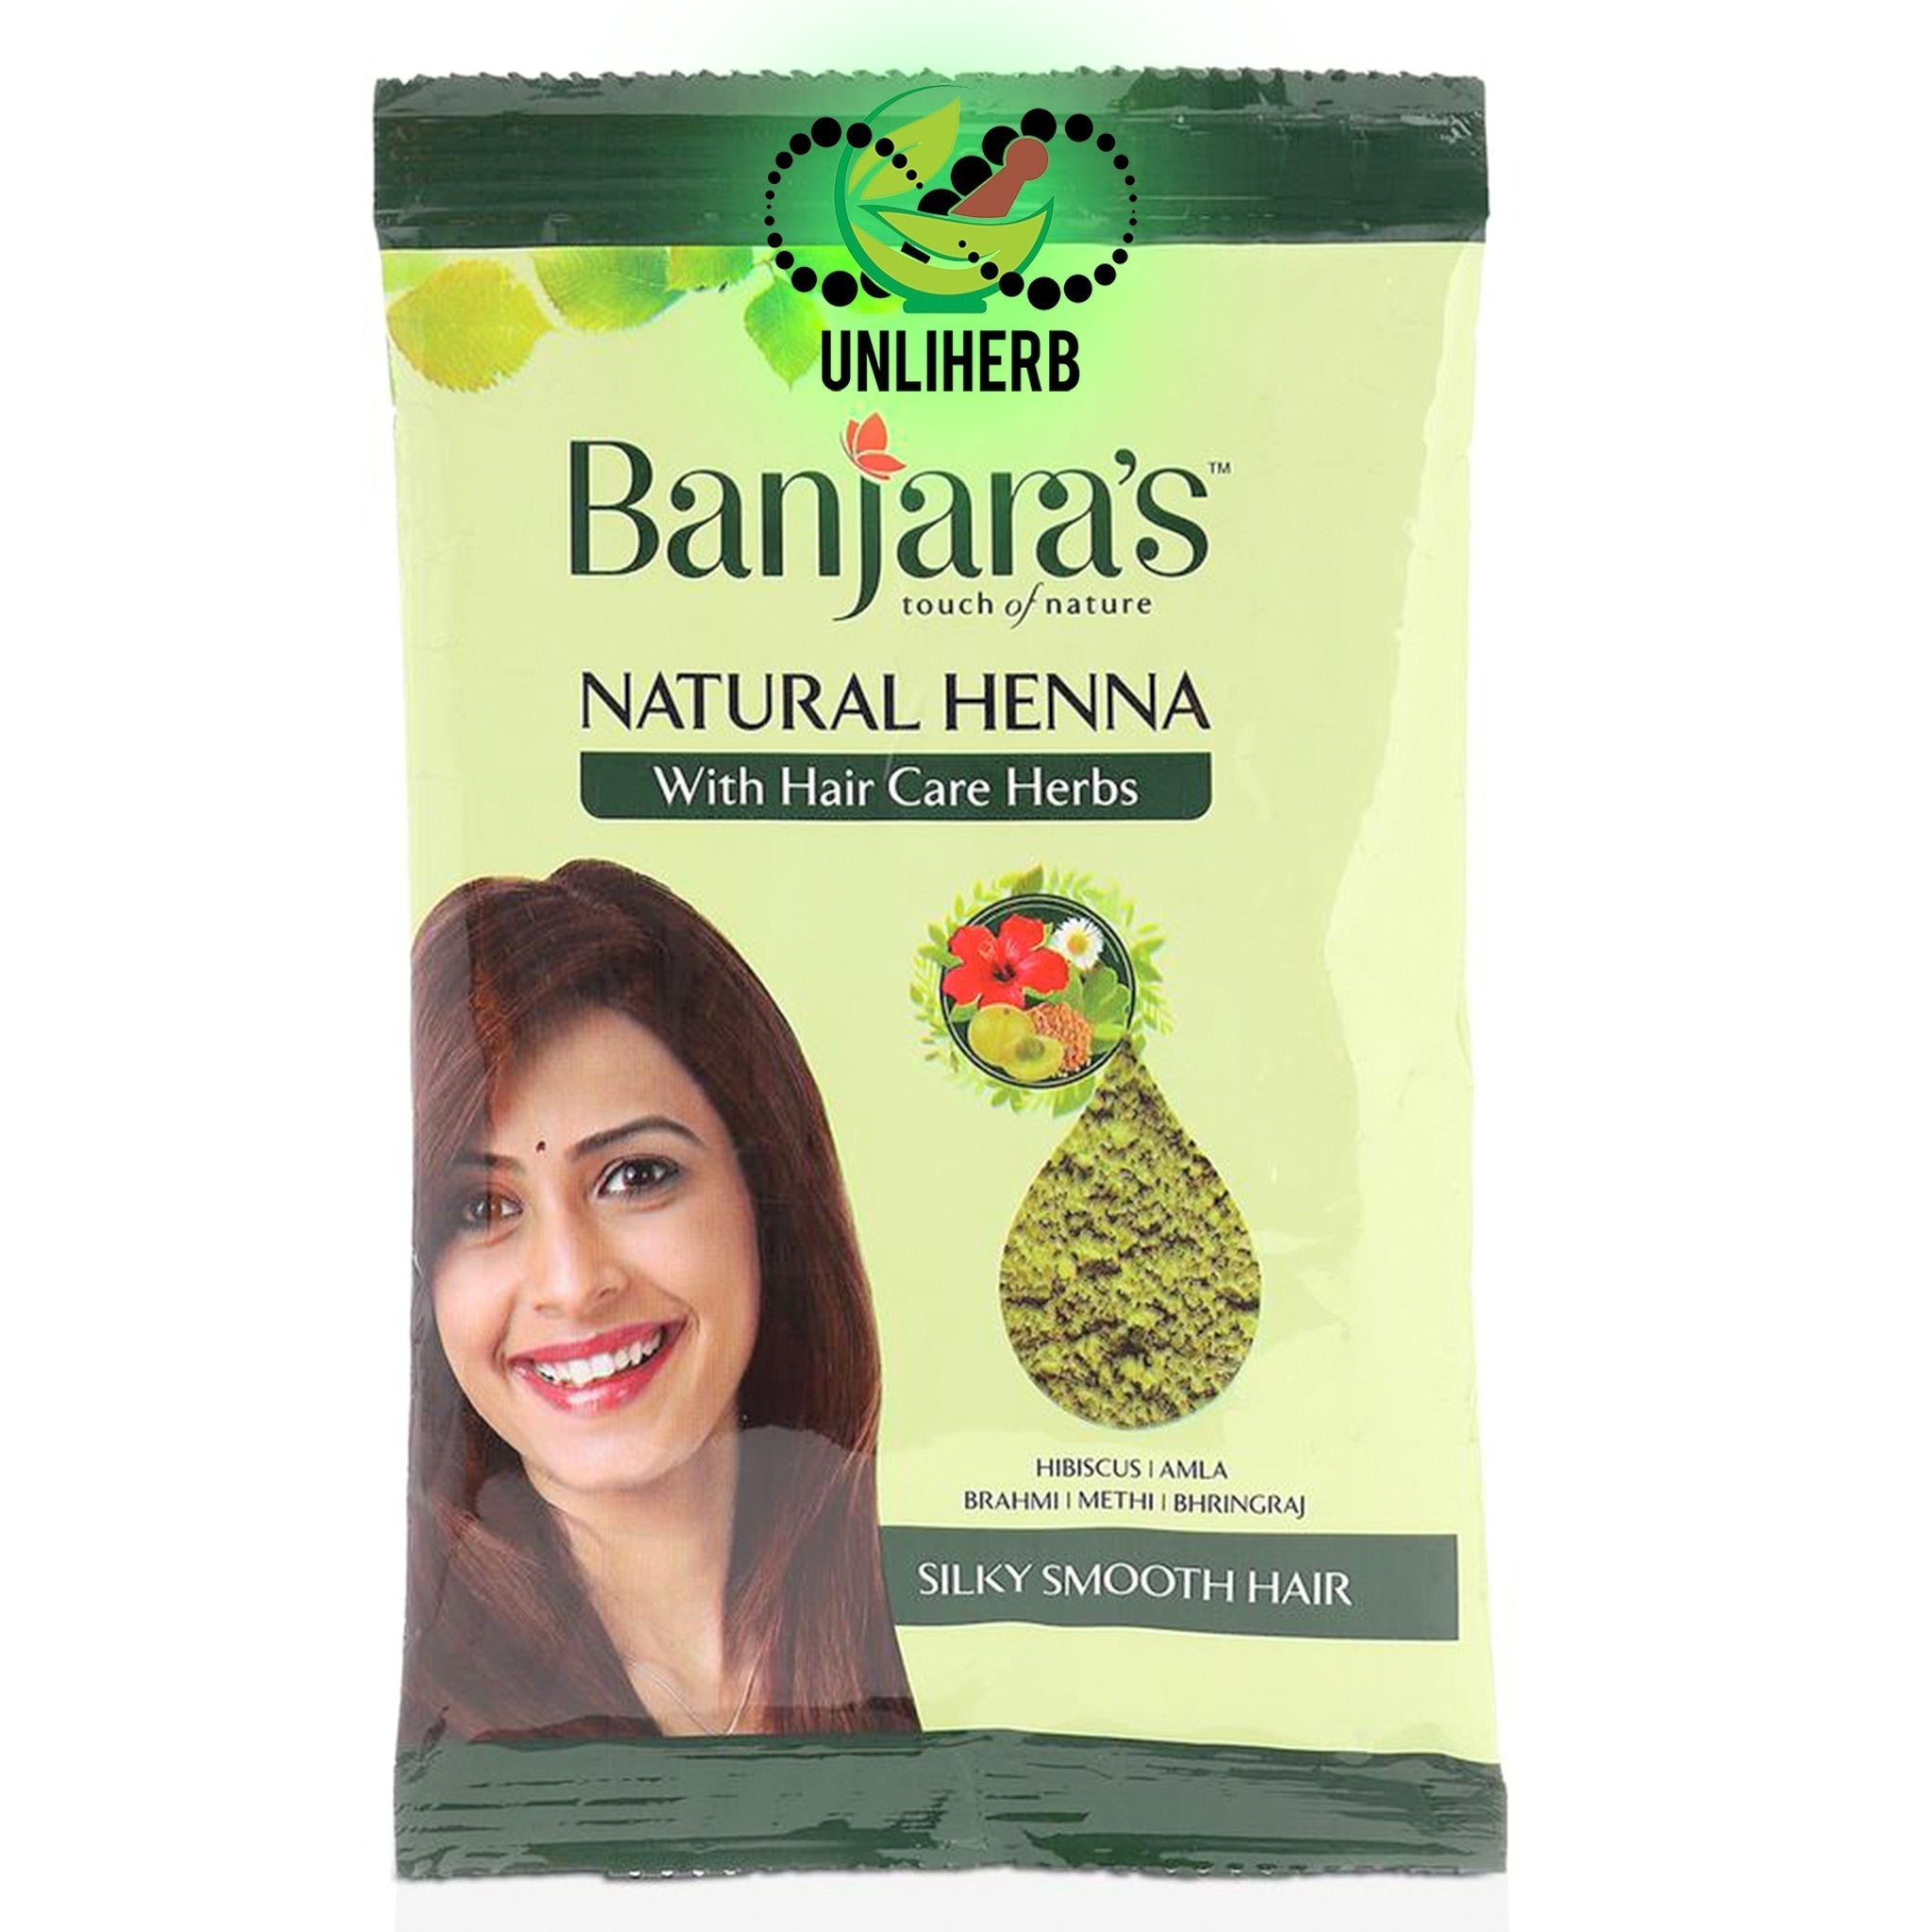 Banjaras Natural Henna with Hair Care Herbs pouch 100g Value Pack of 3 